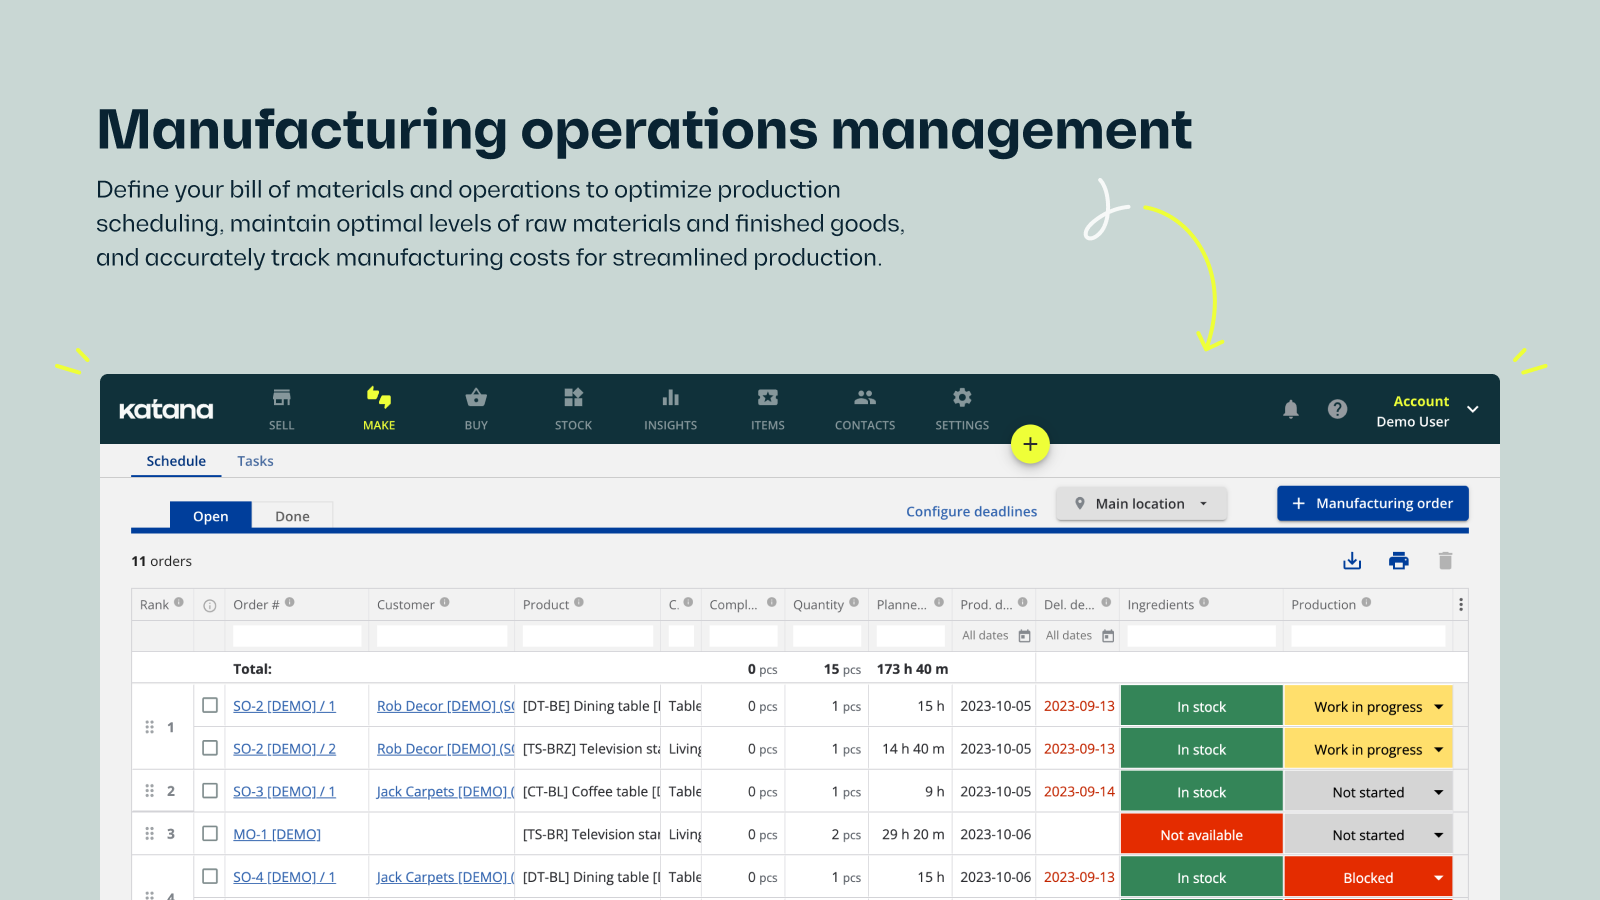 Manufacturing operations management with production scheduling